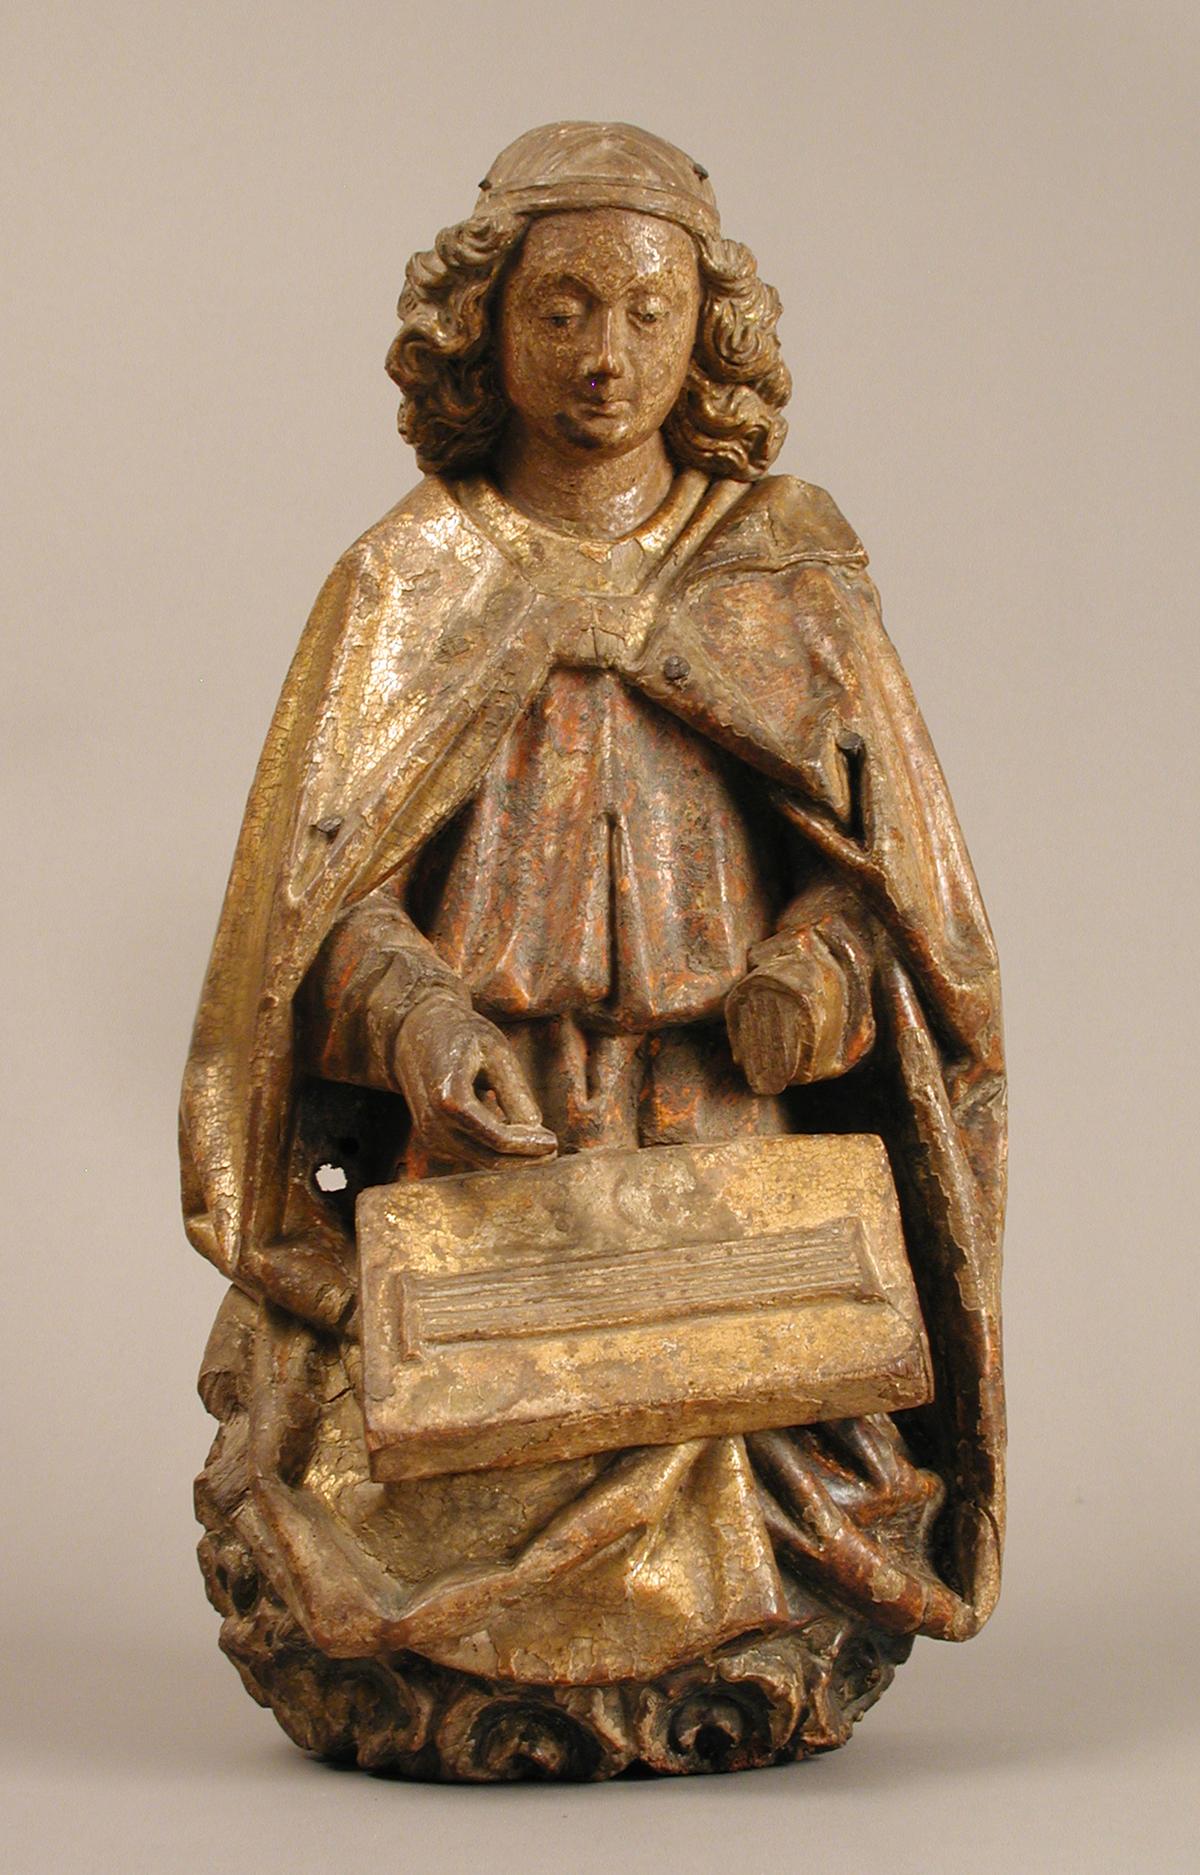 An angel playing a dulcimer, circa 1460–1480, from the Rhine Valley. Gilded and painted wood. The Metropolitan Museum of Art, New York City. (Public Domain)